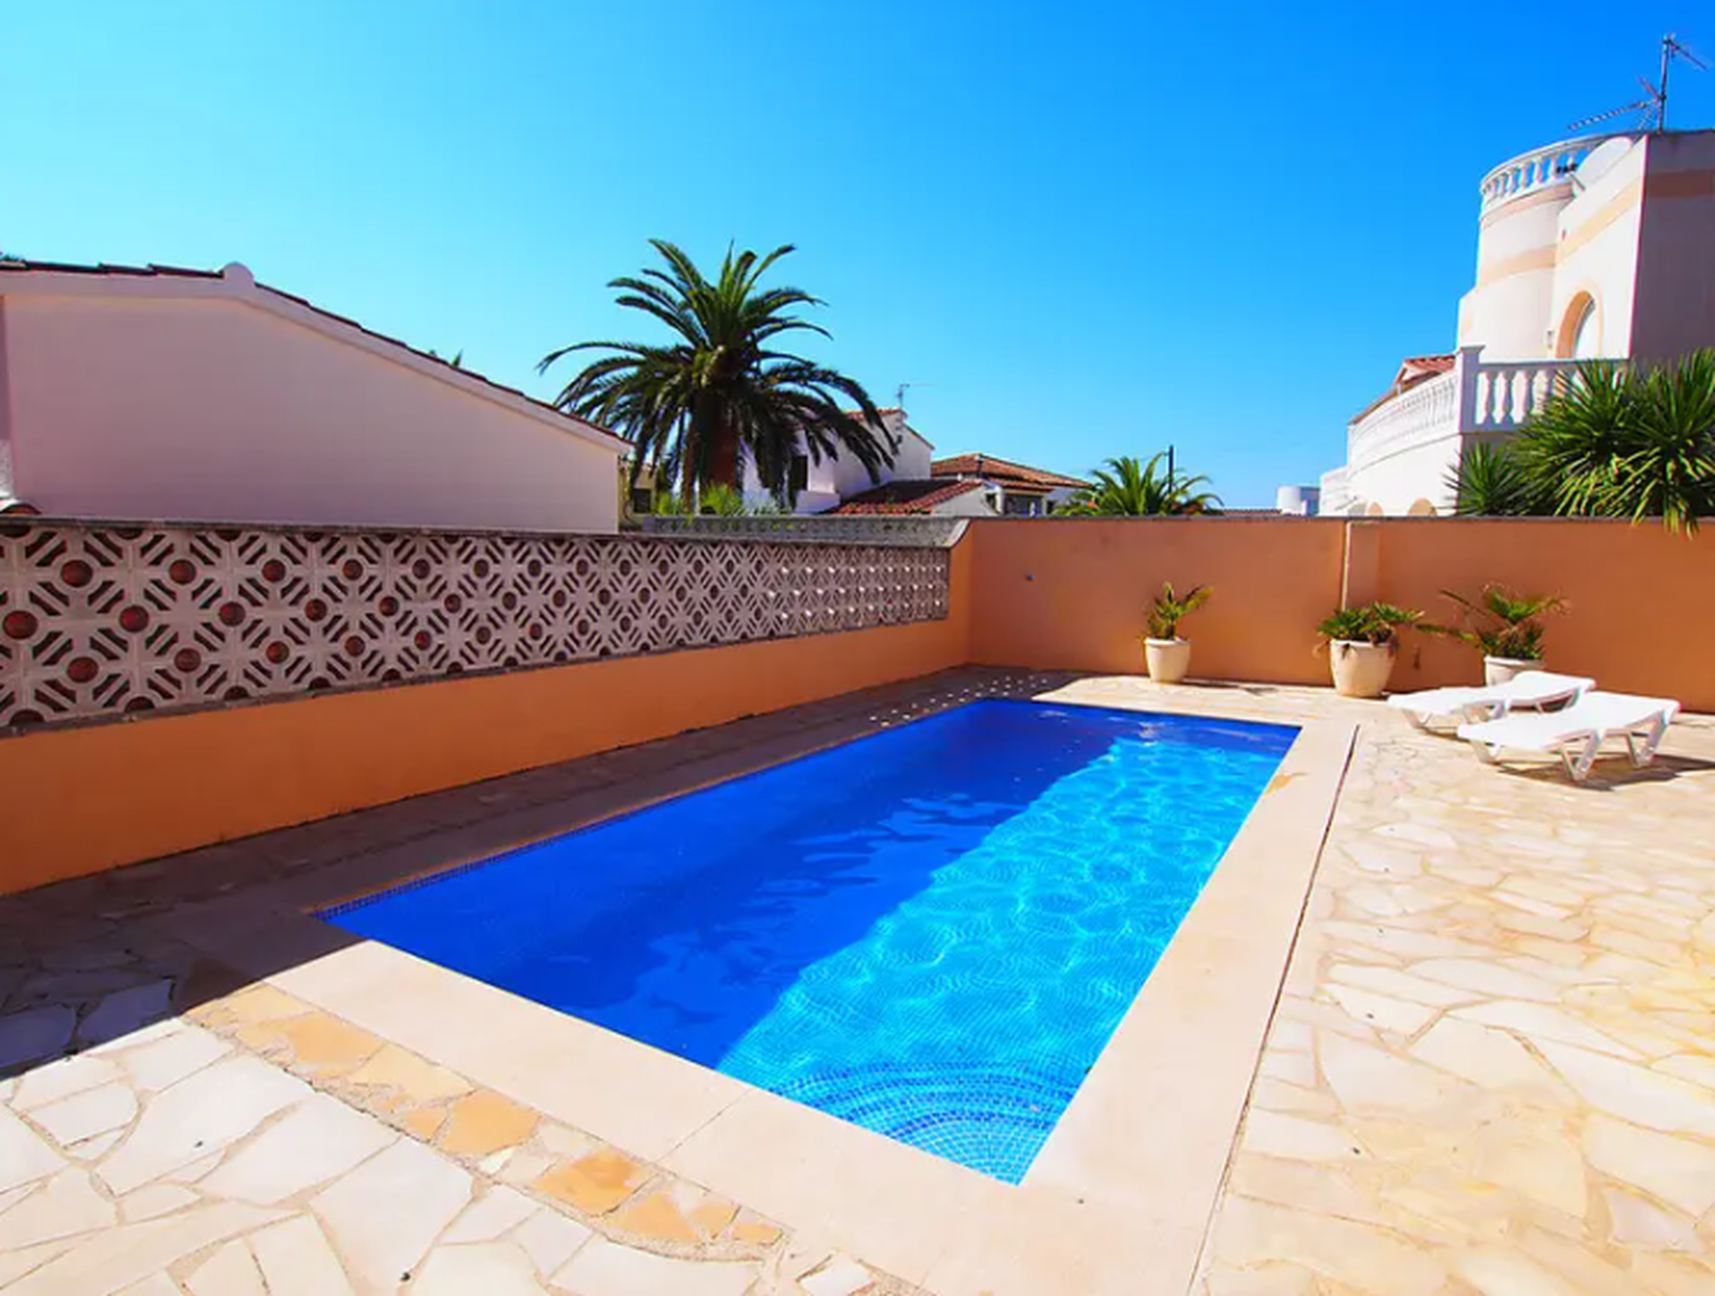 House for sale with swimming pool near the beach Empuriabrava